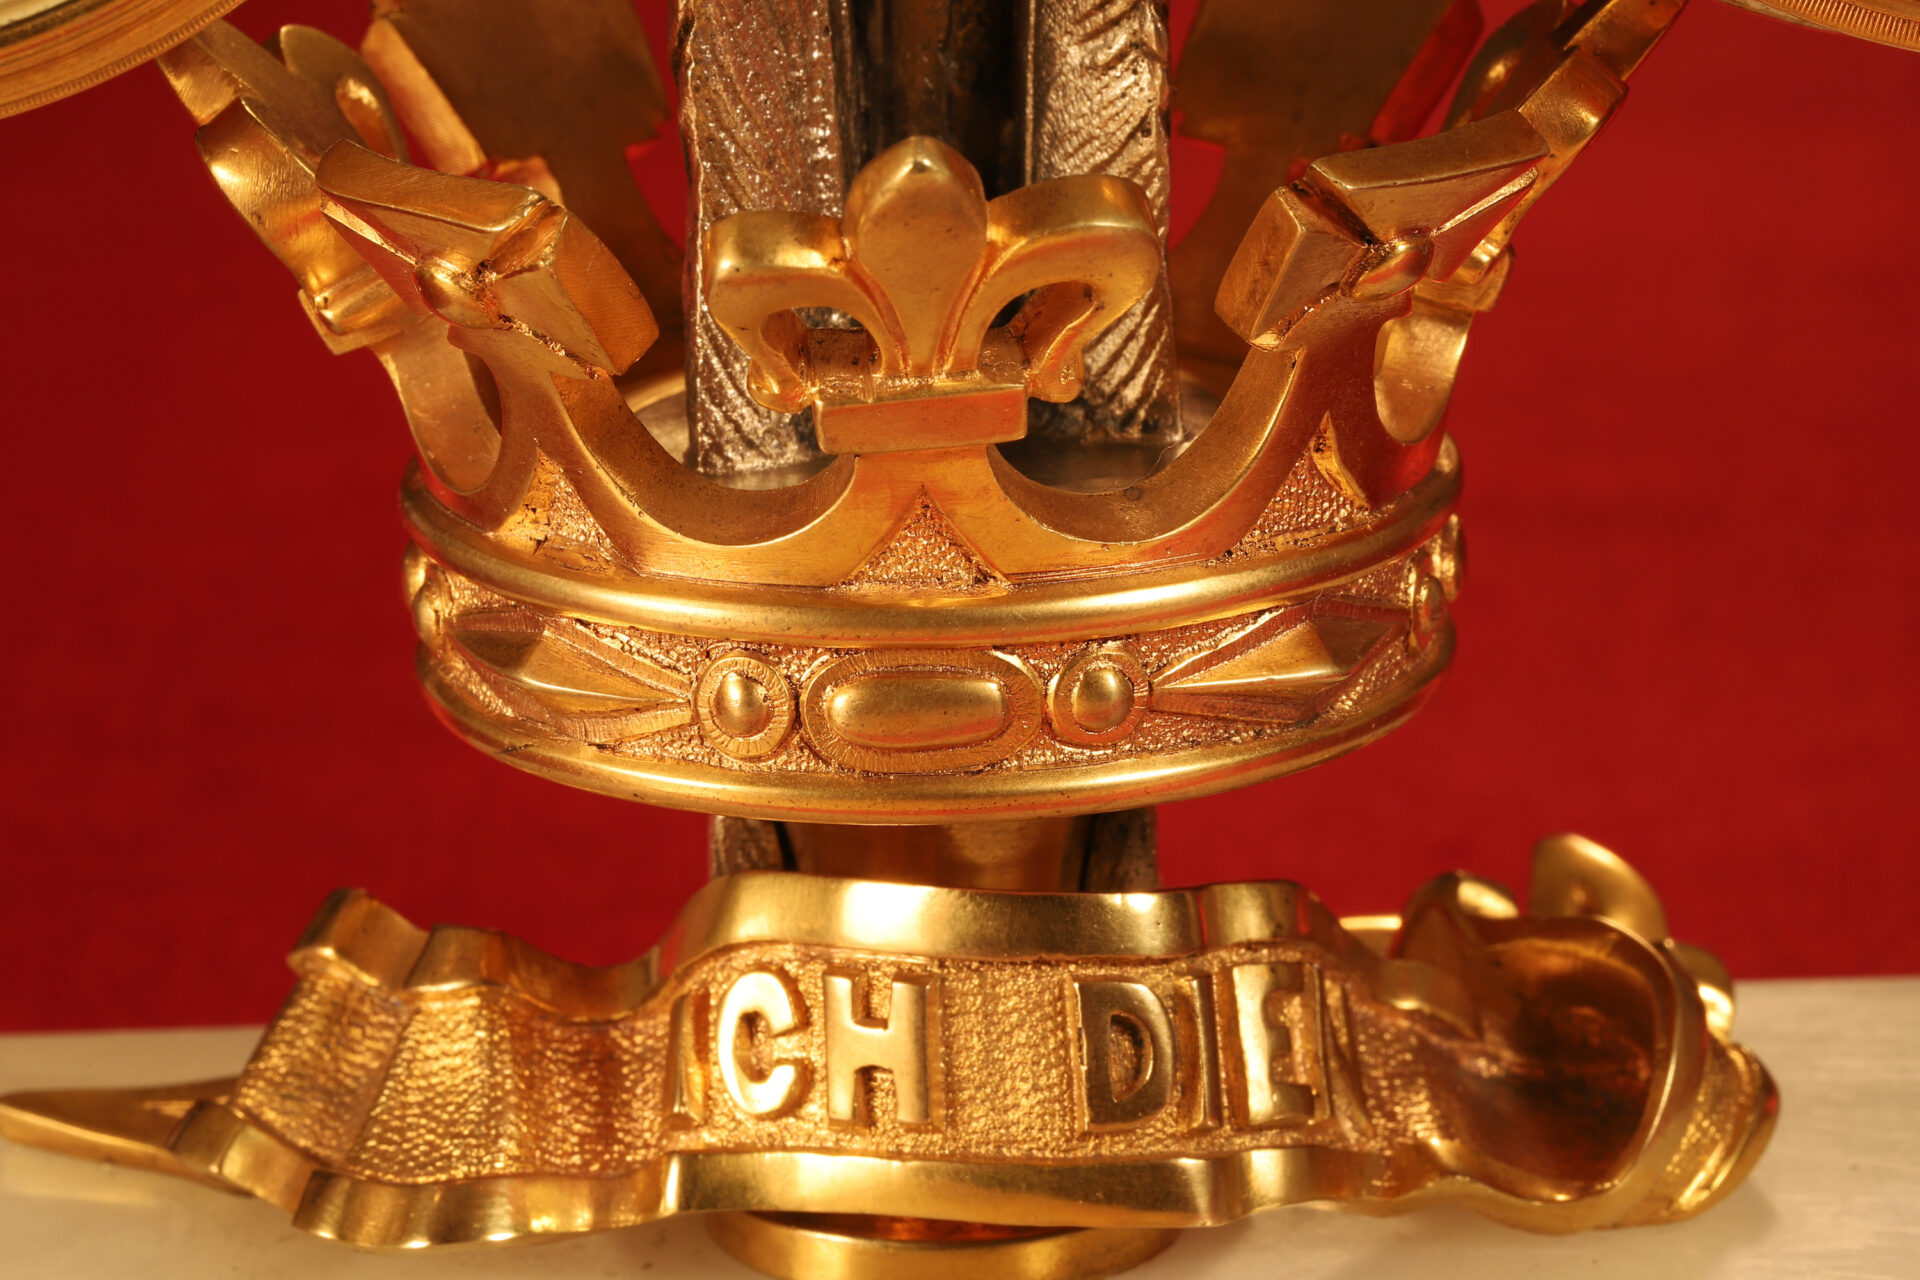 Close up of motto and coronet from Prince of Wales Feathers Desk Compendium c1880